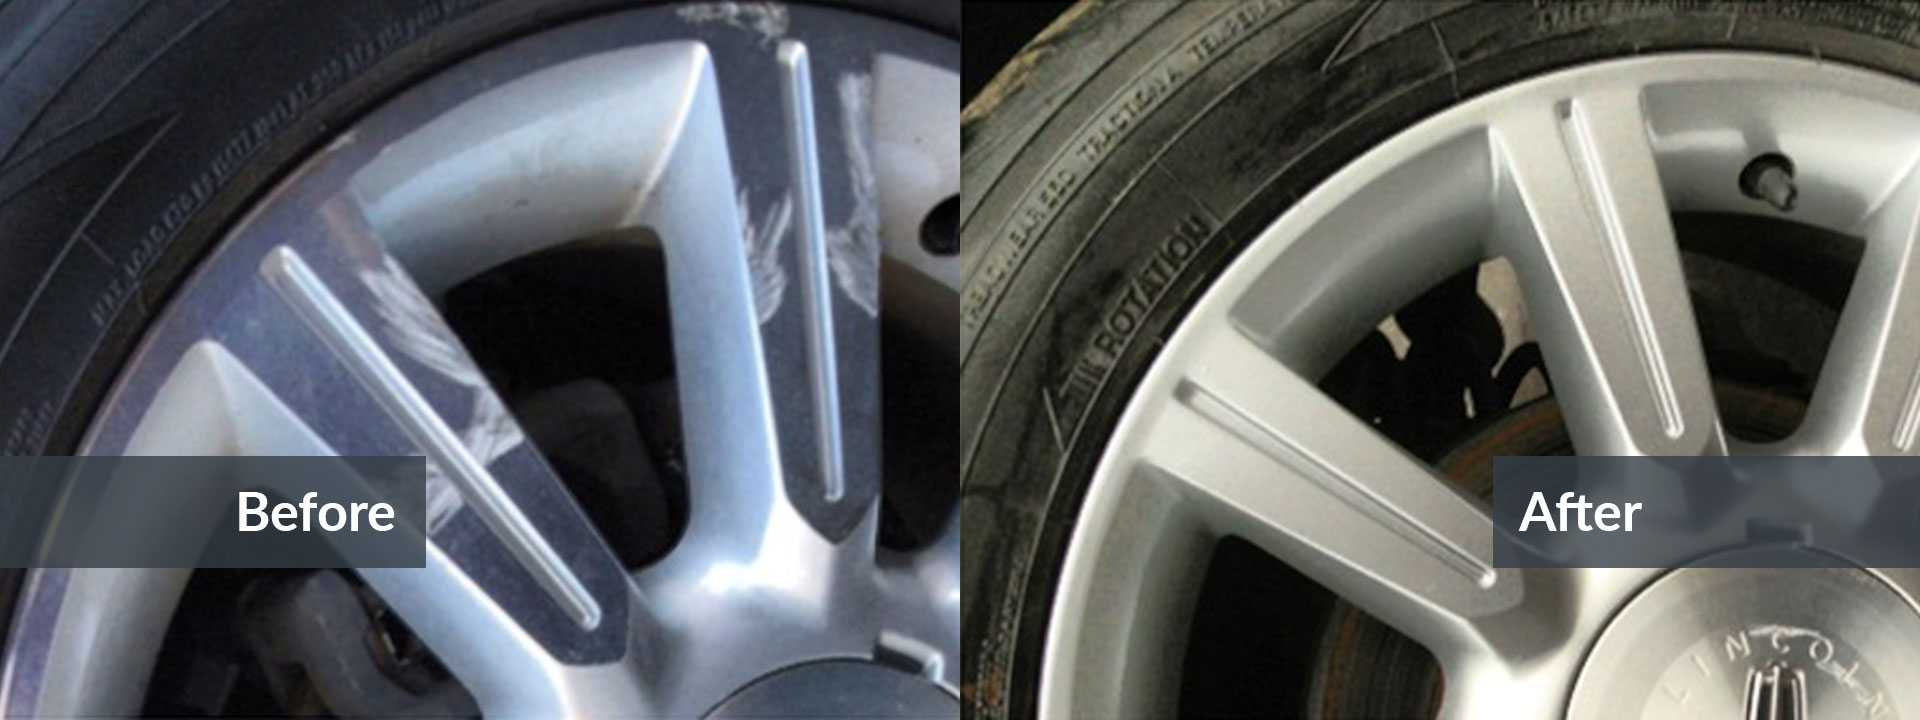 before and after machined wheel repair